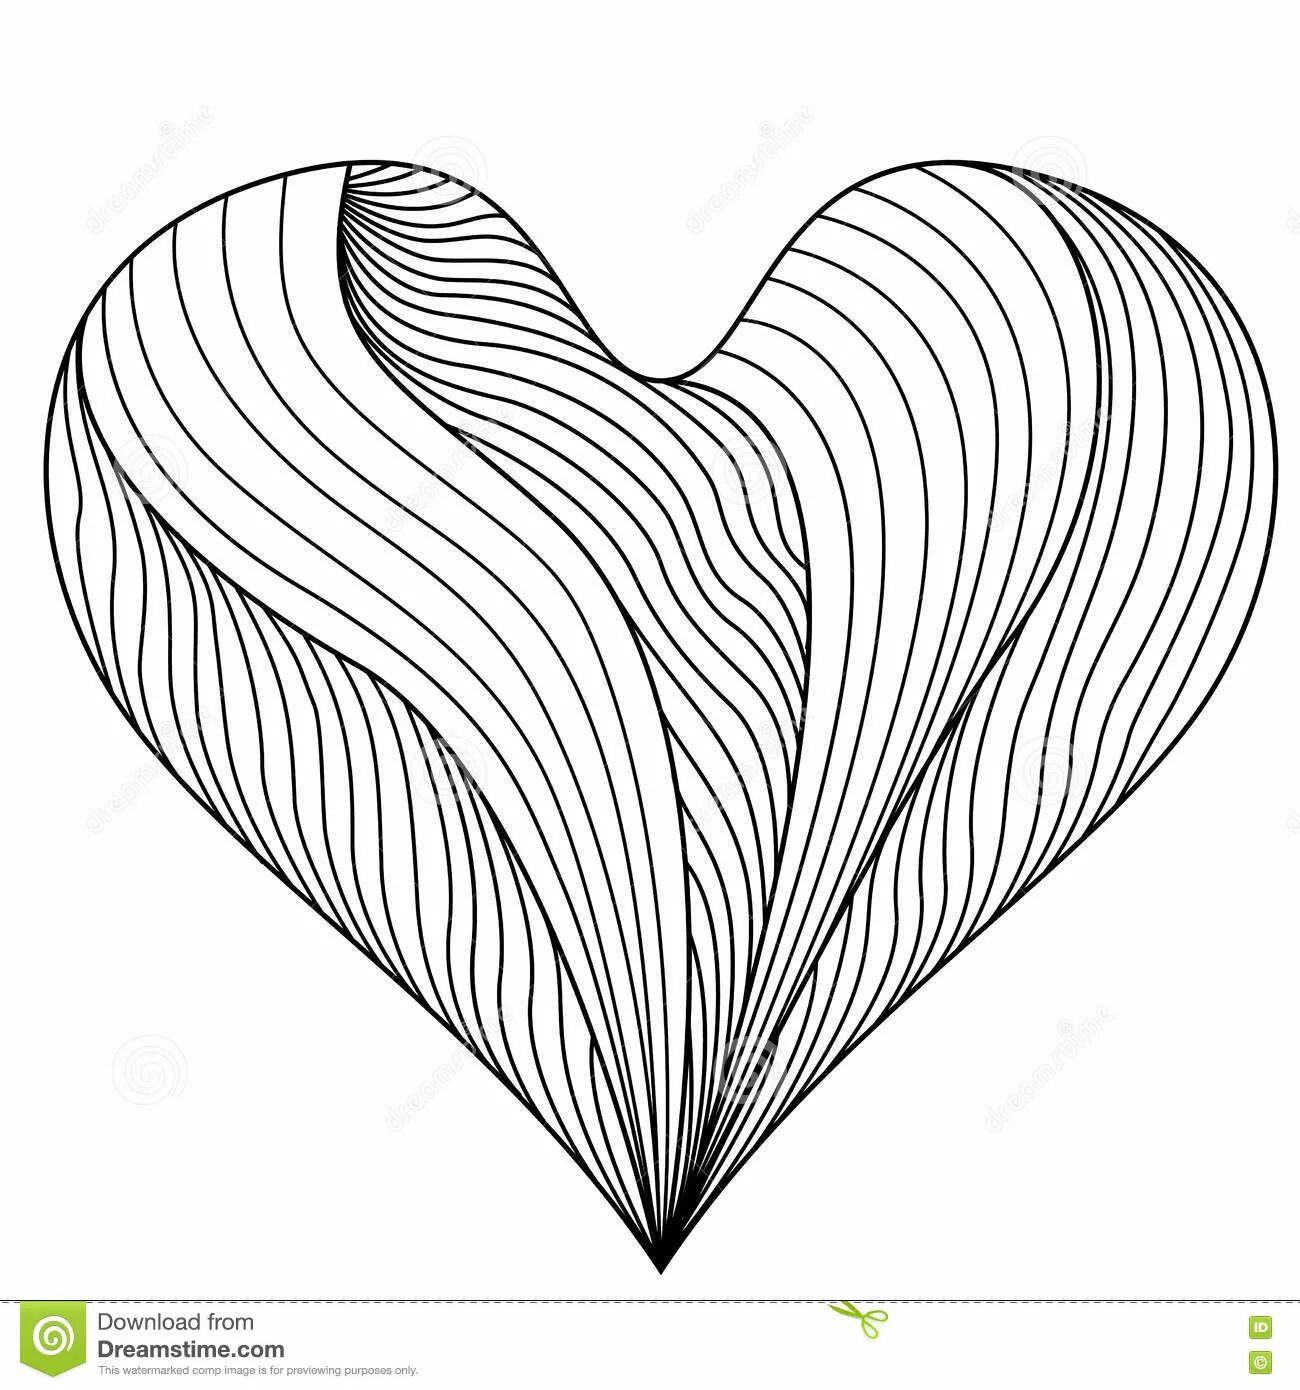 Deluxe Rainbow Heart Coloring Page